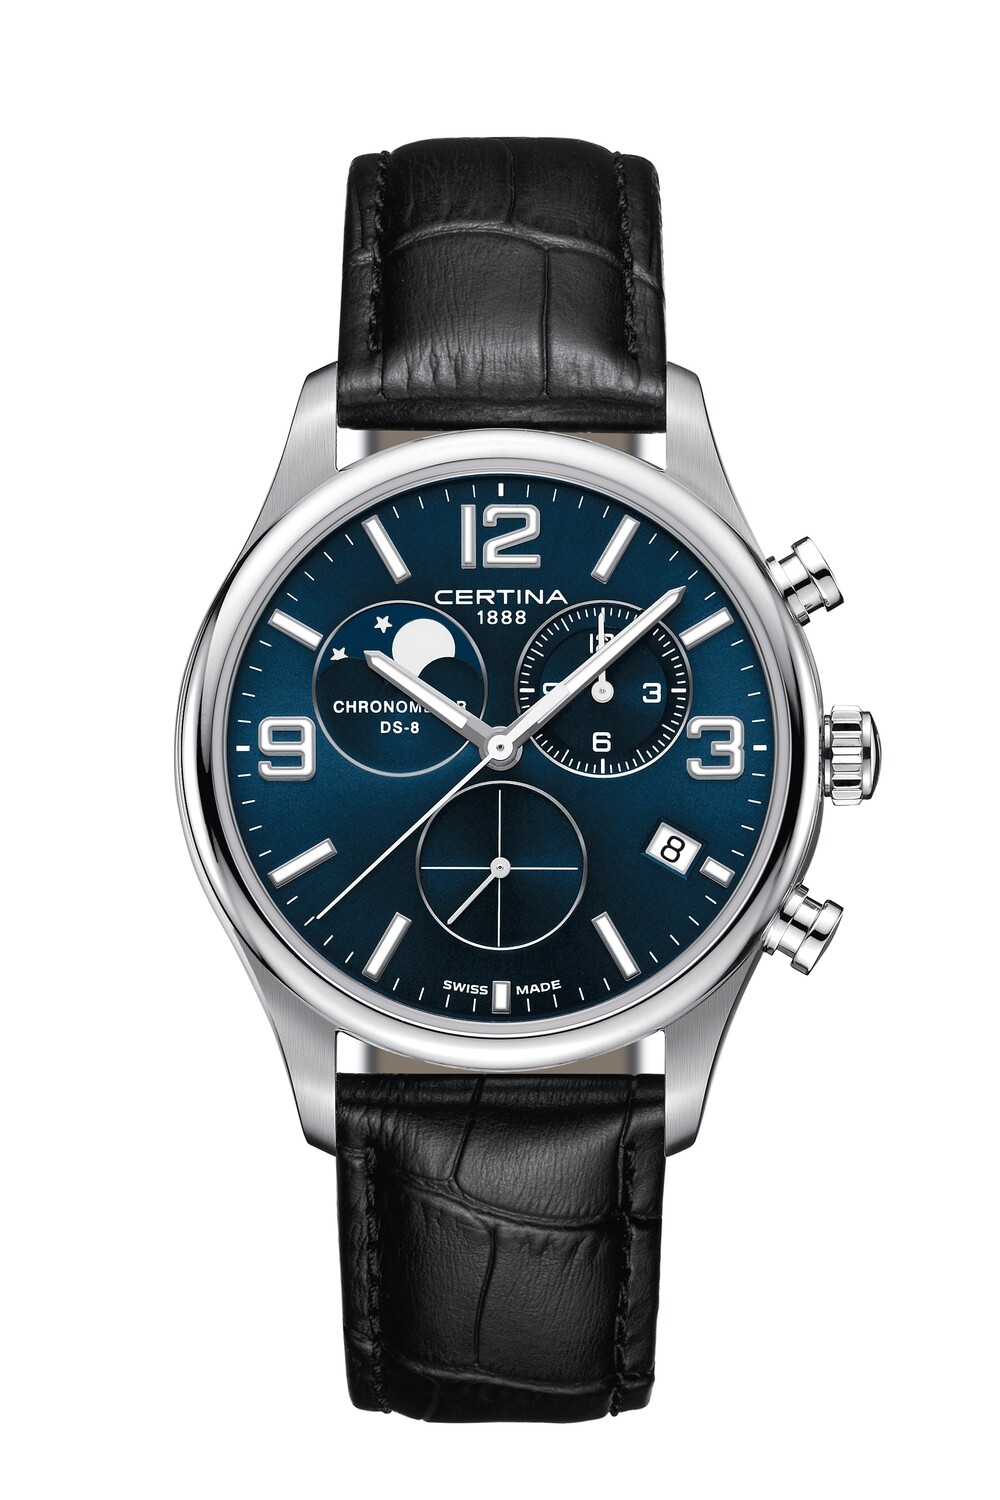 Certina DS-8 Moonphase